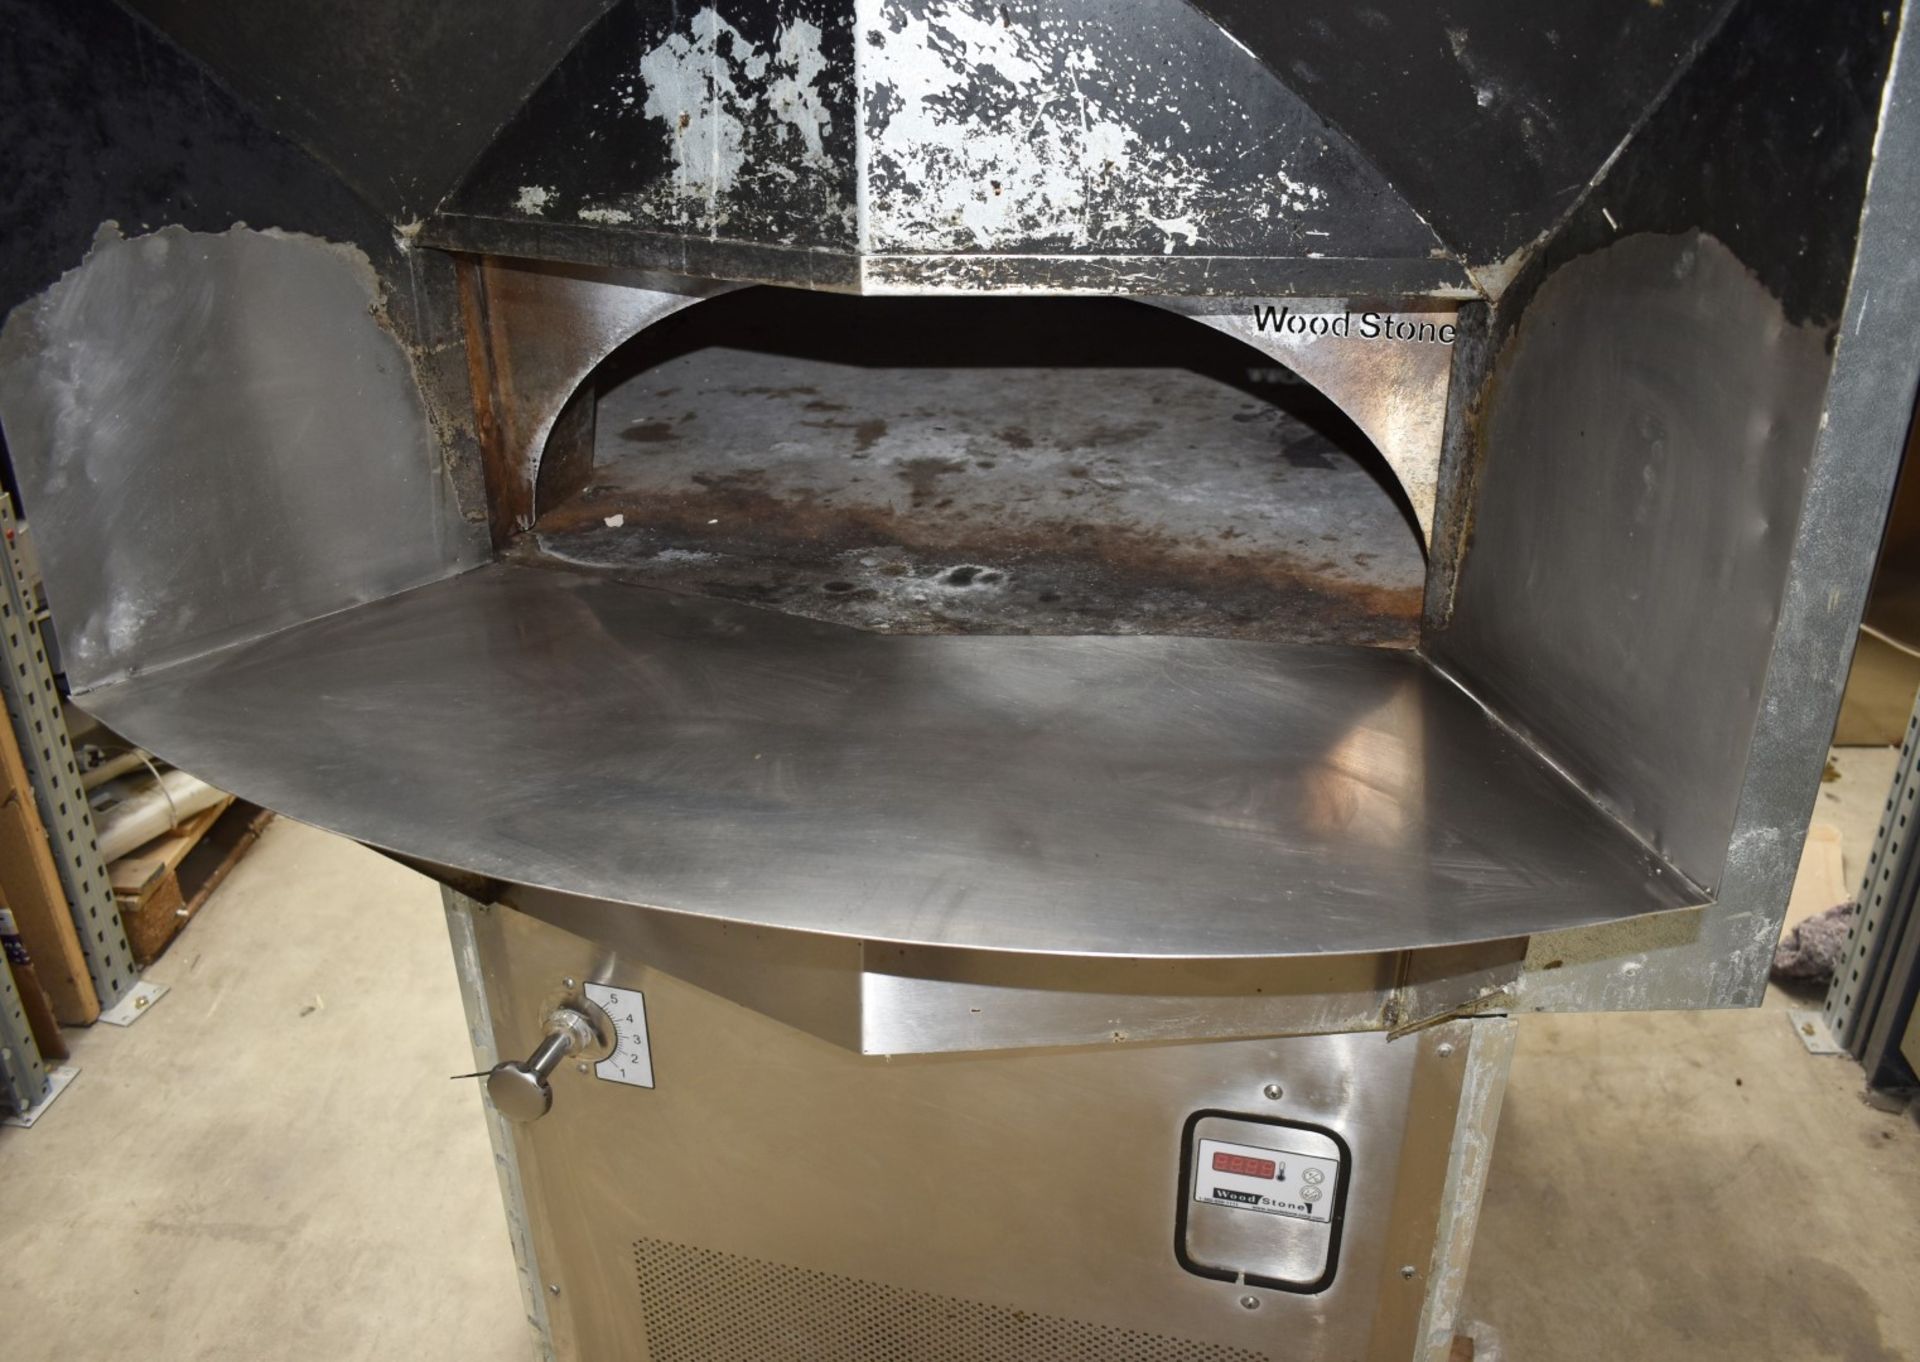 1 x Woodstone Mountain Series Commercial Gas Fired Pizza Oven - Approx RRP £25,000 - Image 15 of 25